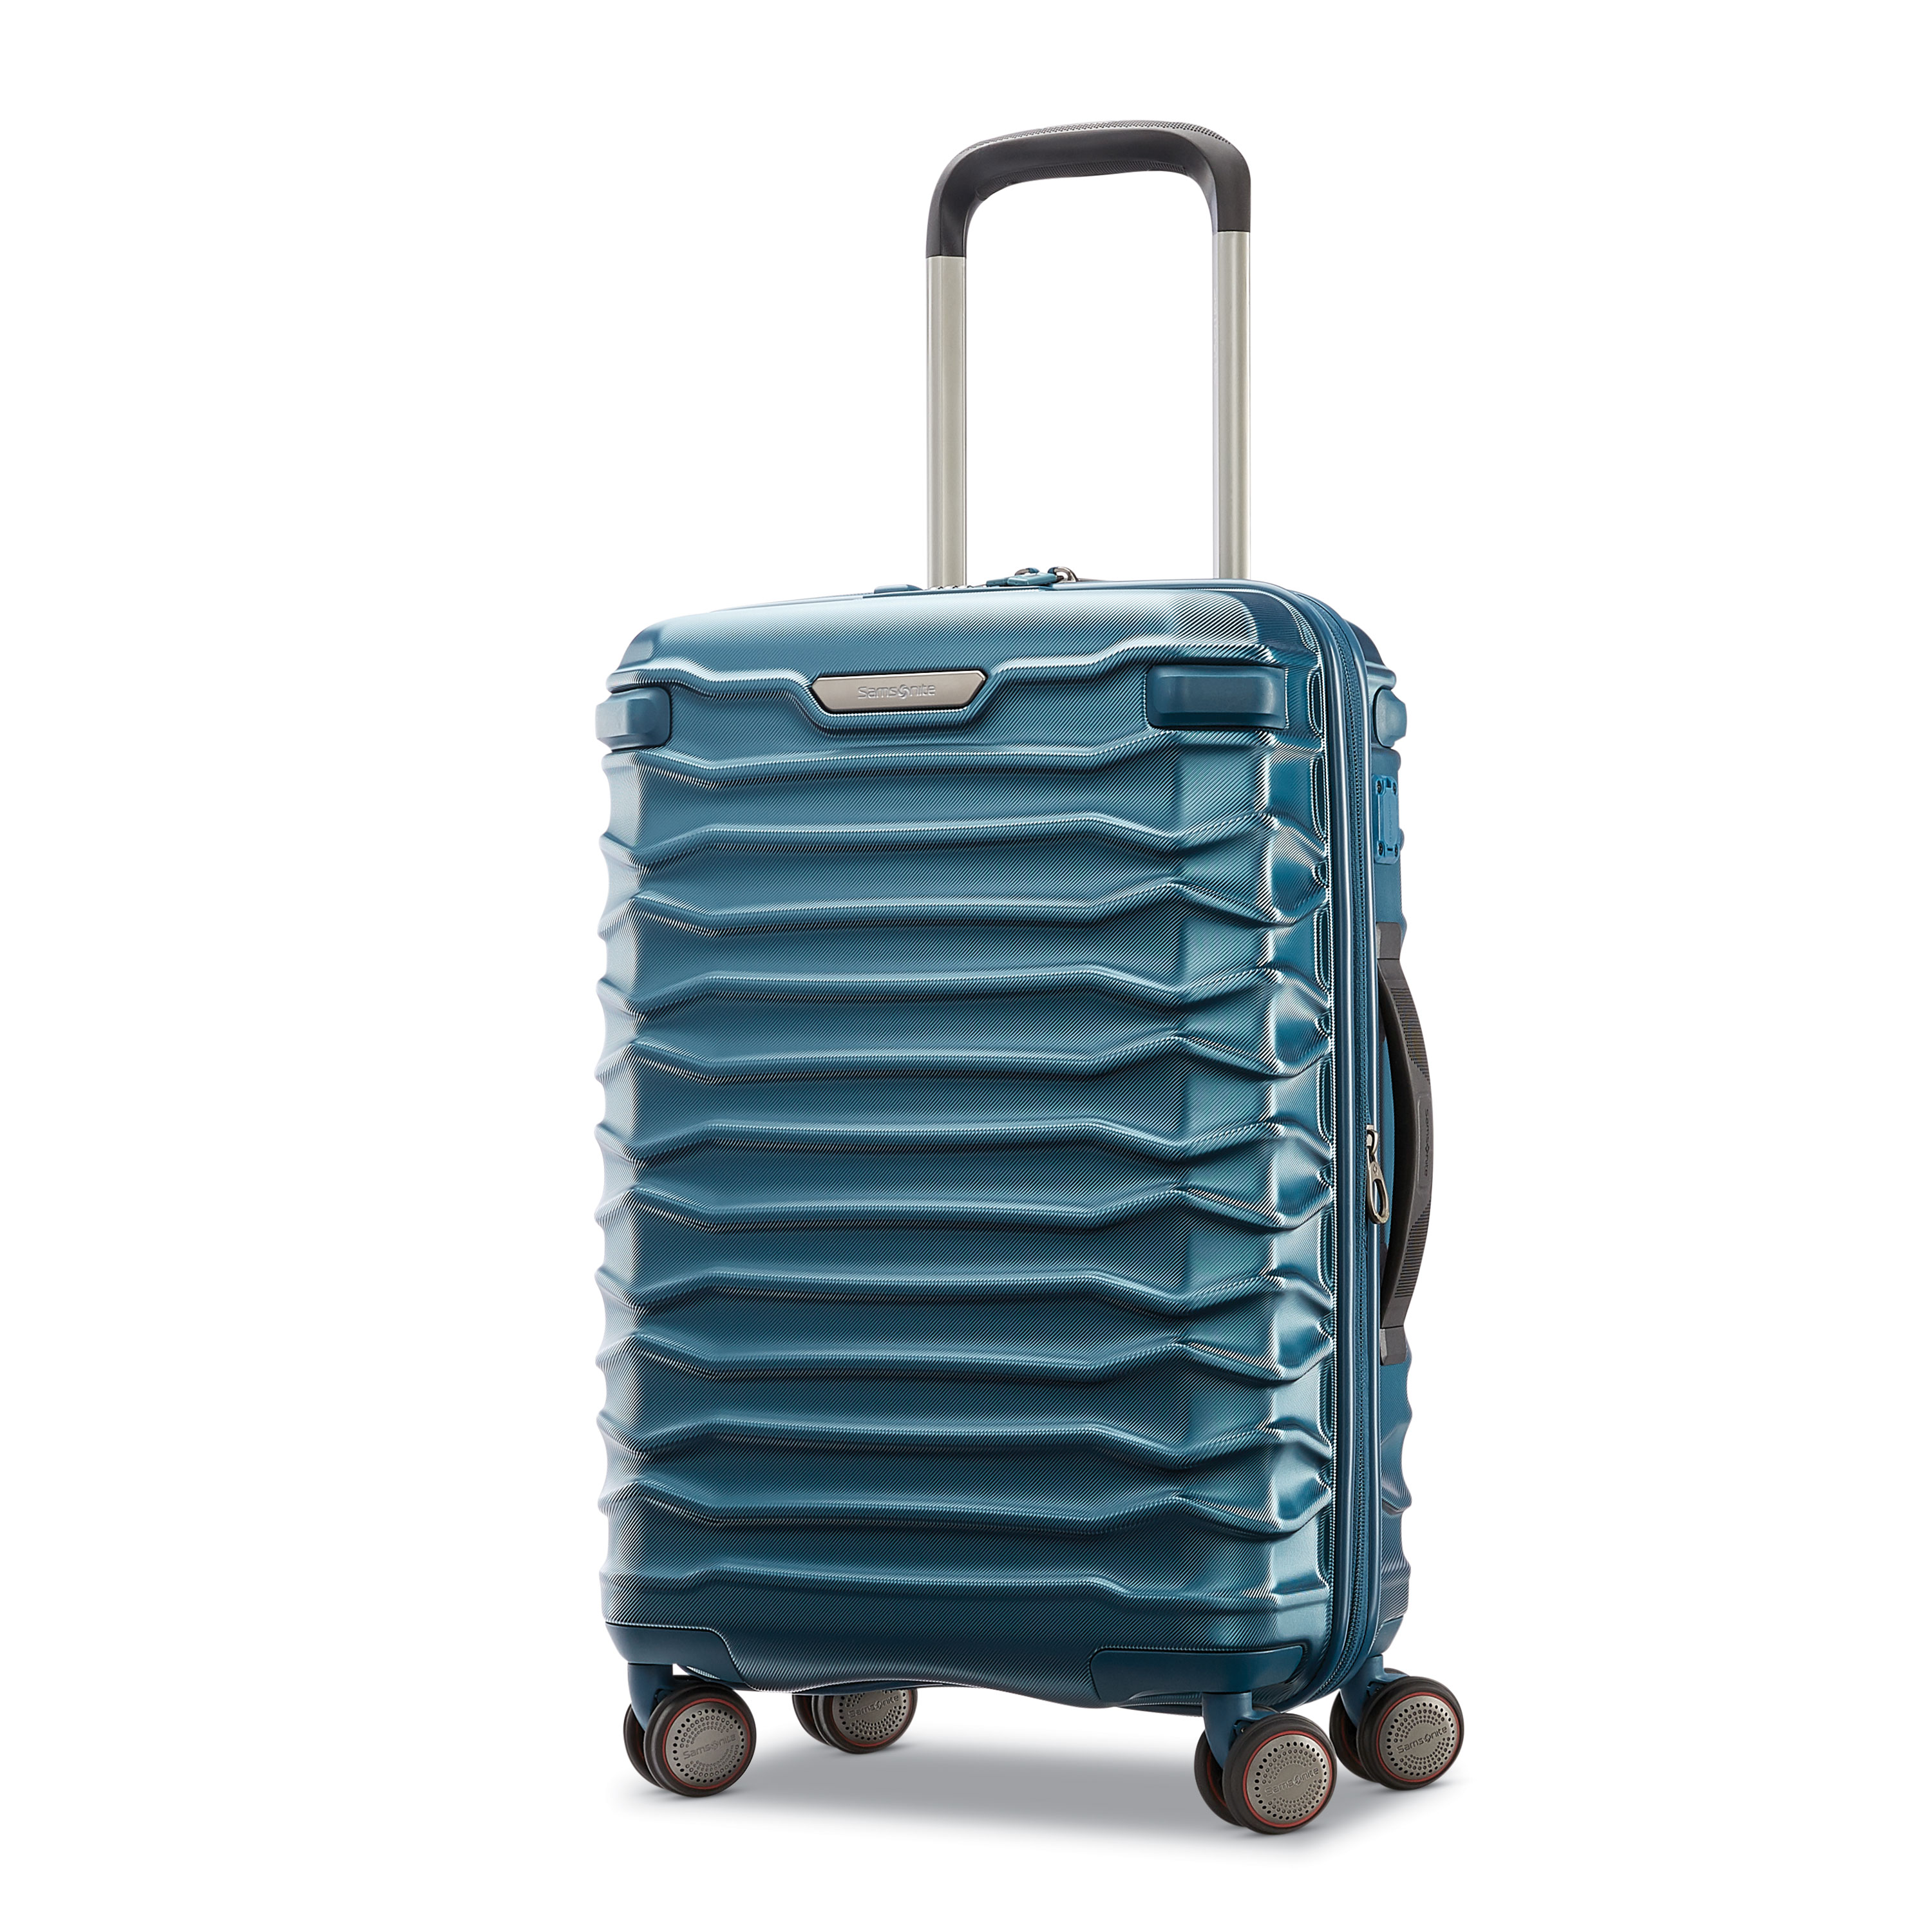 Buy Stryde 2 Carry-On Spinner for USD 249.99